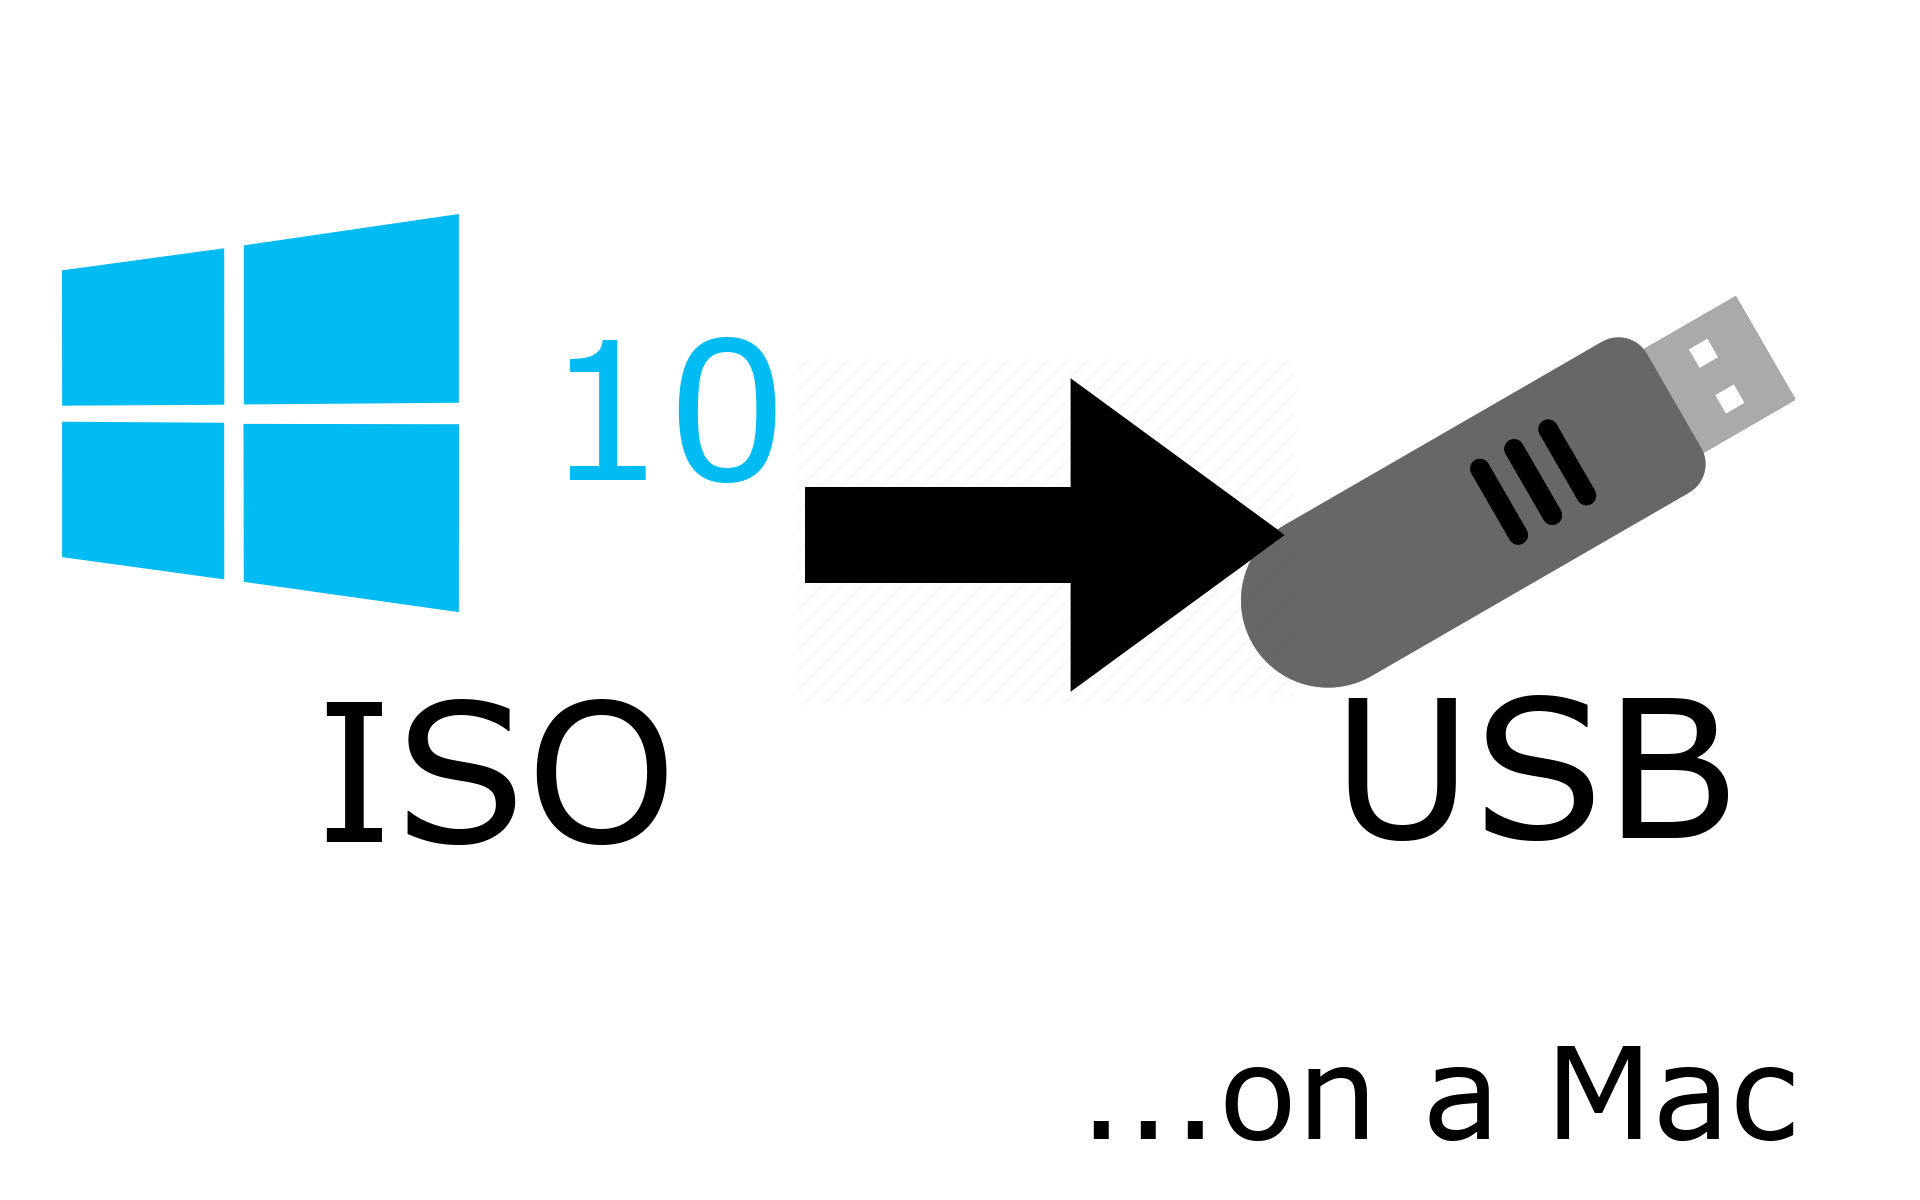 how to download windows 10 on usb using mac